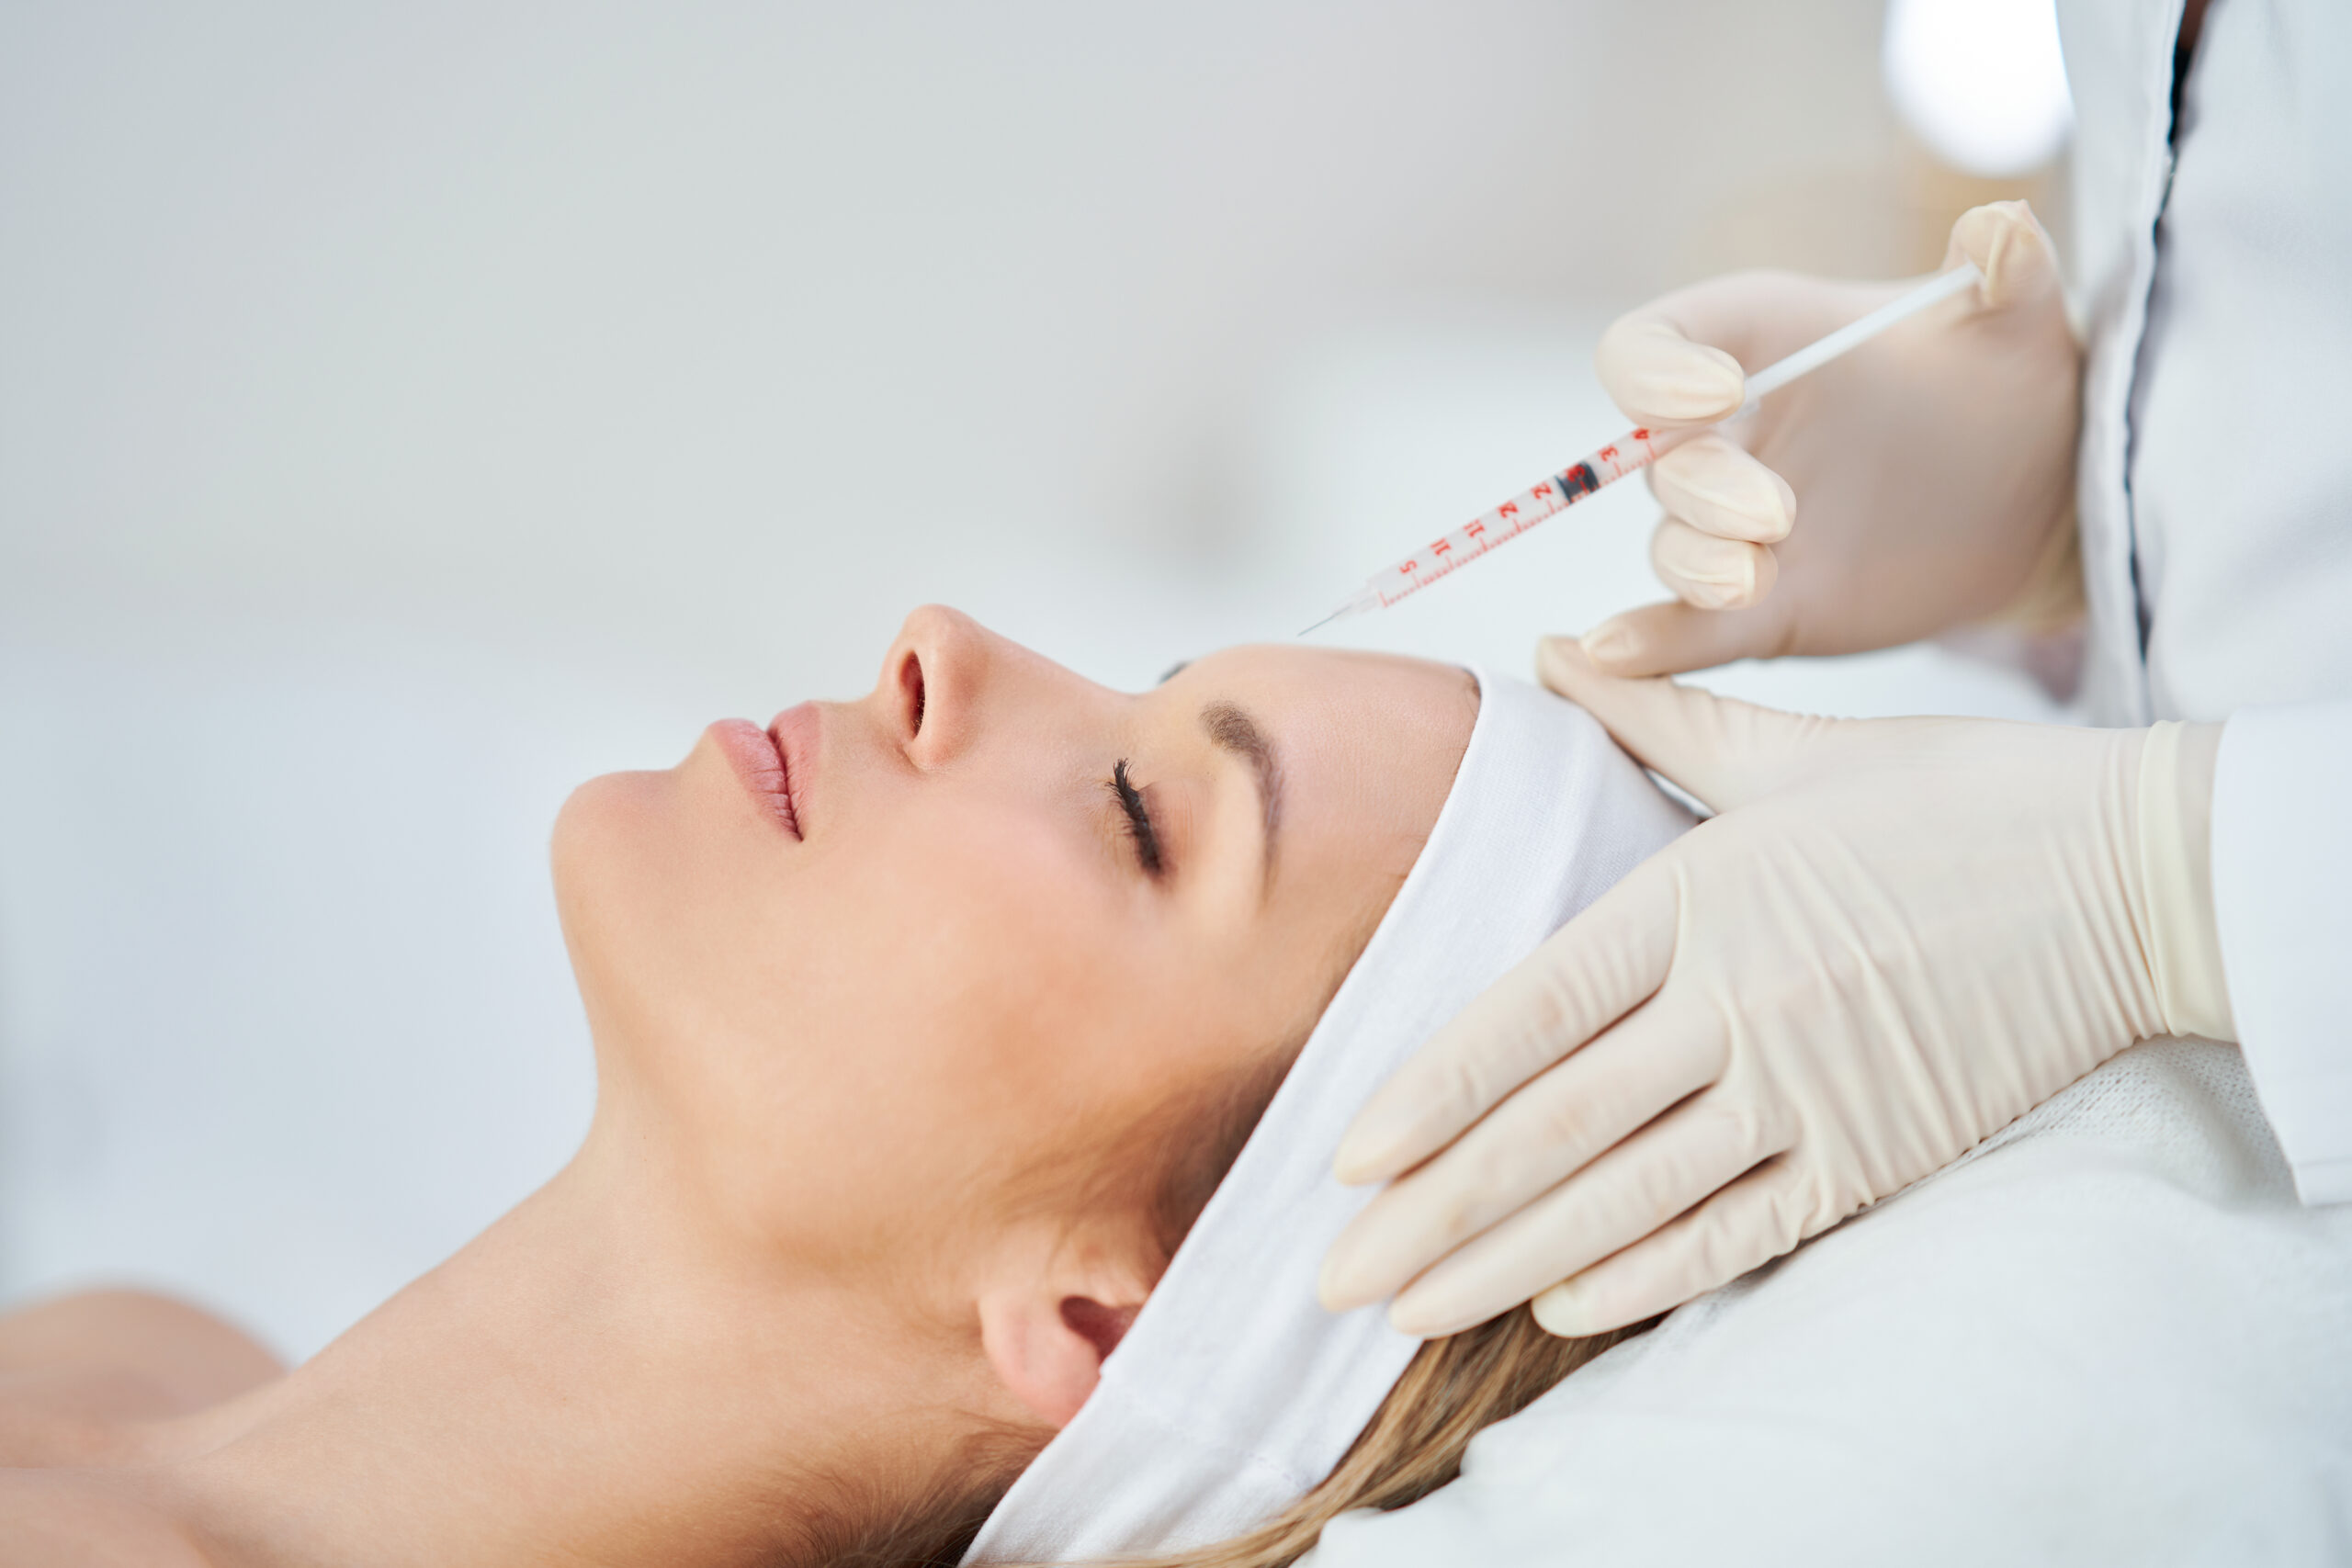 Injections of Botox and Filler in Michigan Might be Subject to Tighter Regulation under a Measure That was Just Presented